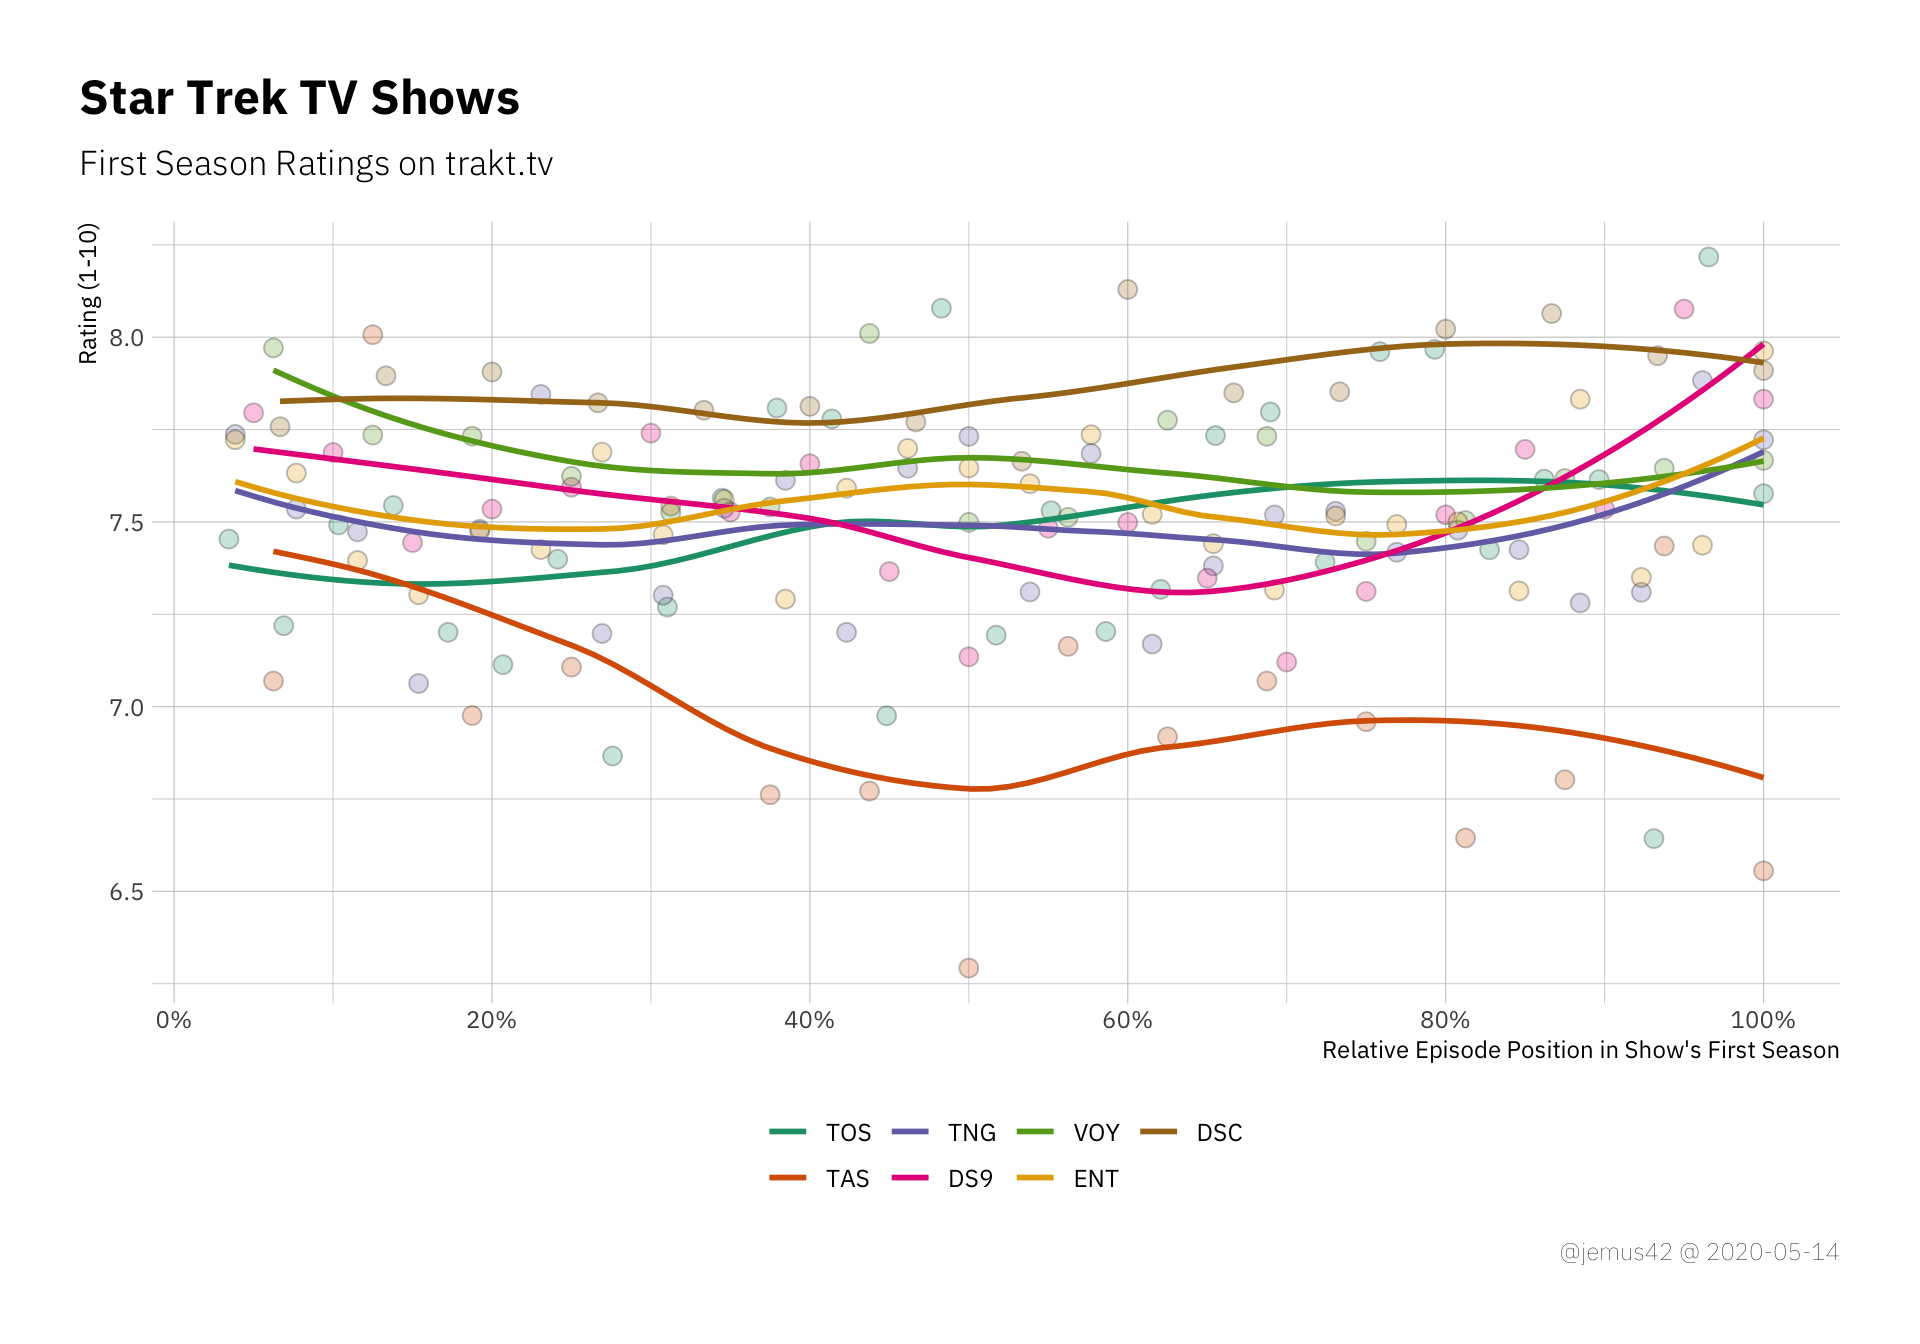 First-season episode ratings. The x-axis is computed by dividing the episode number by the total number of episodes in each season